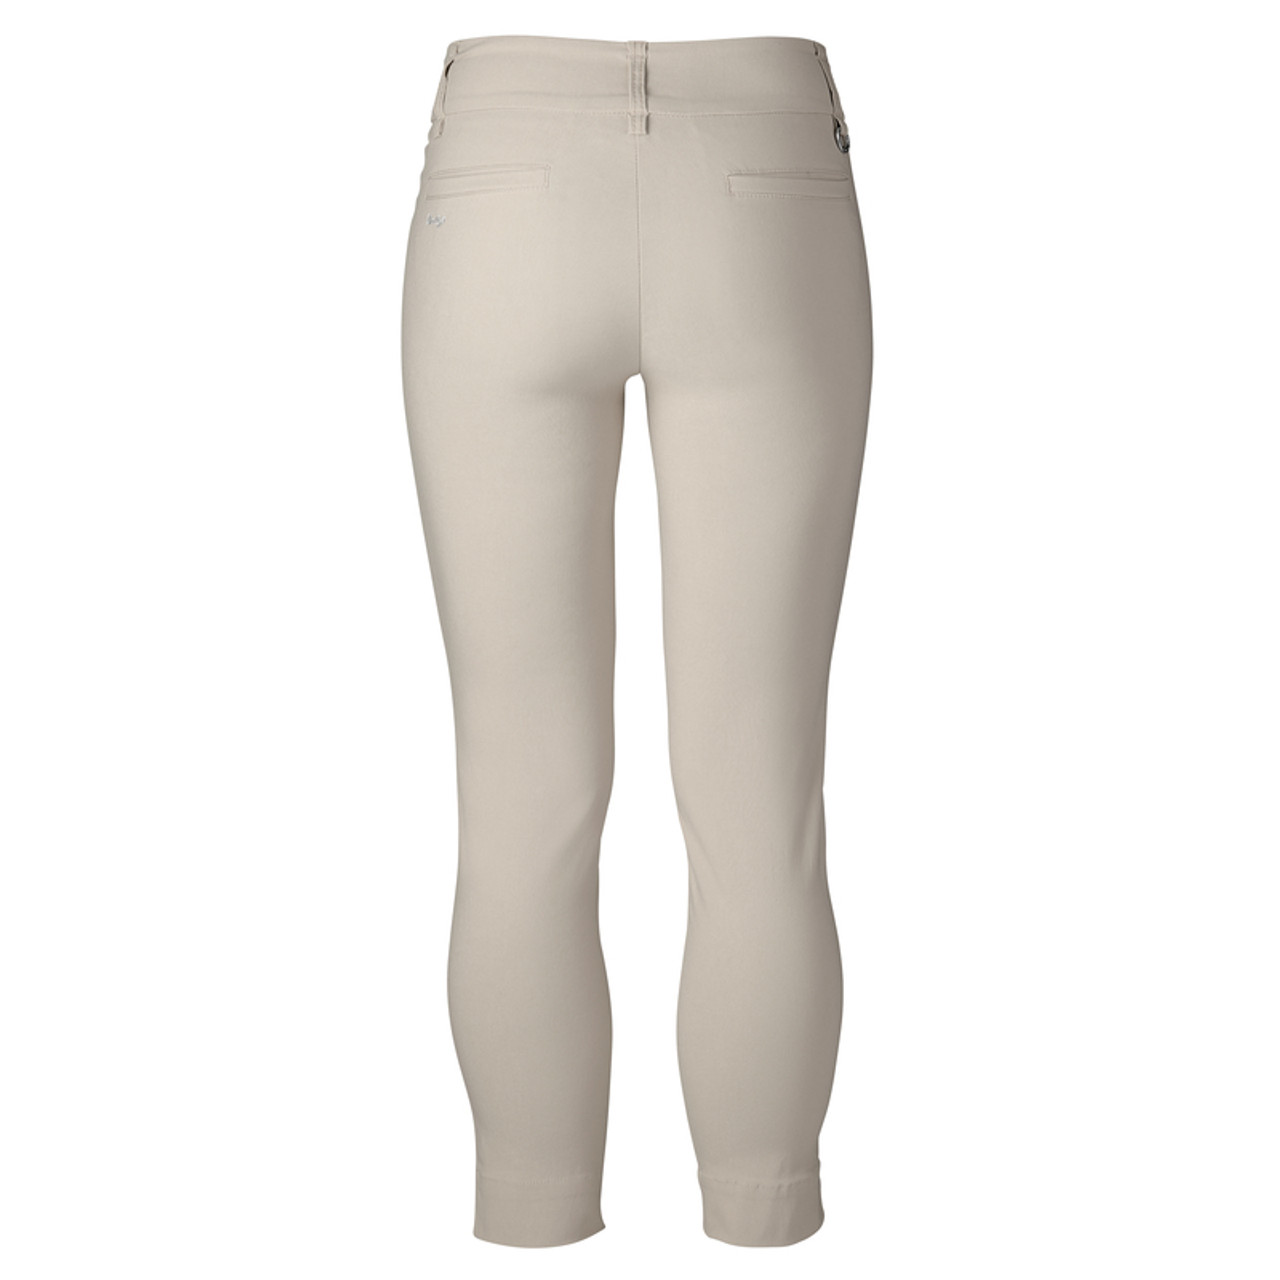 Daily Sports Magic High Water Ankle Pants - Sandy Beige - Fore Ladies -  Golf Dresses and Clothes, Tennis Skirts and Outfits, and Fashionable  Activewear